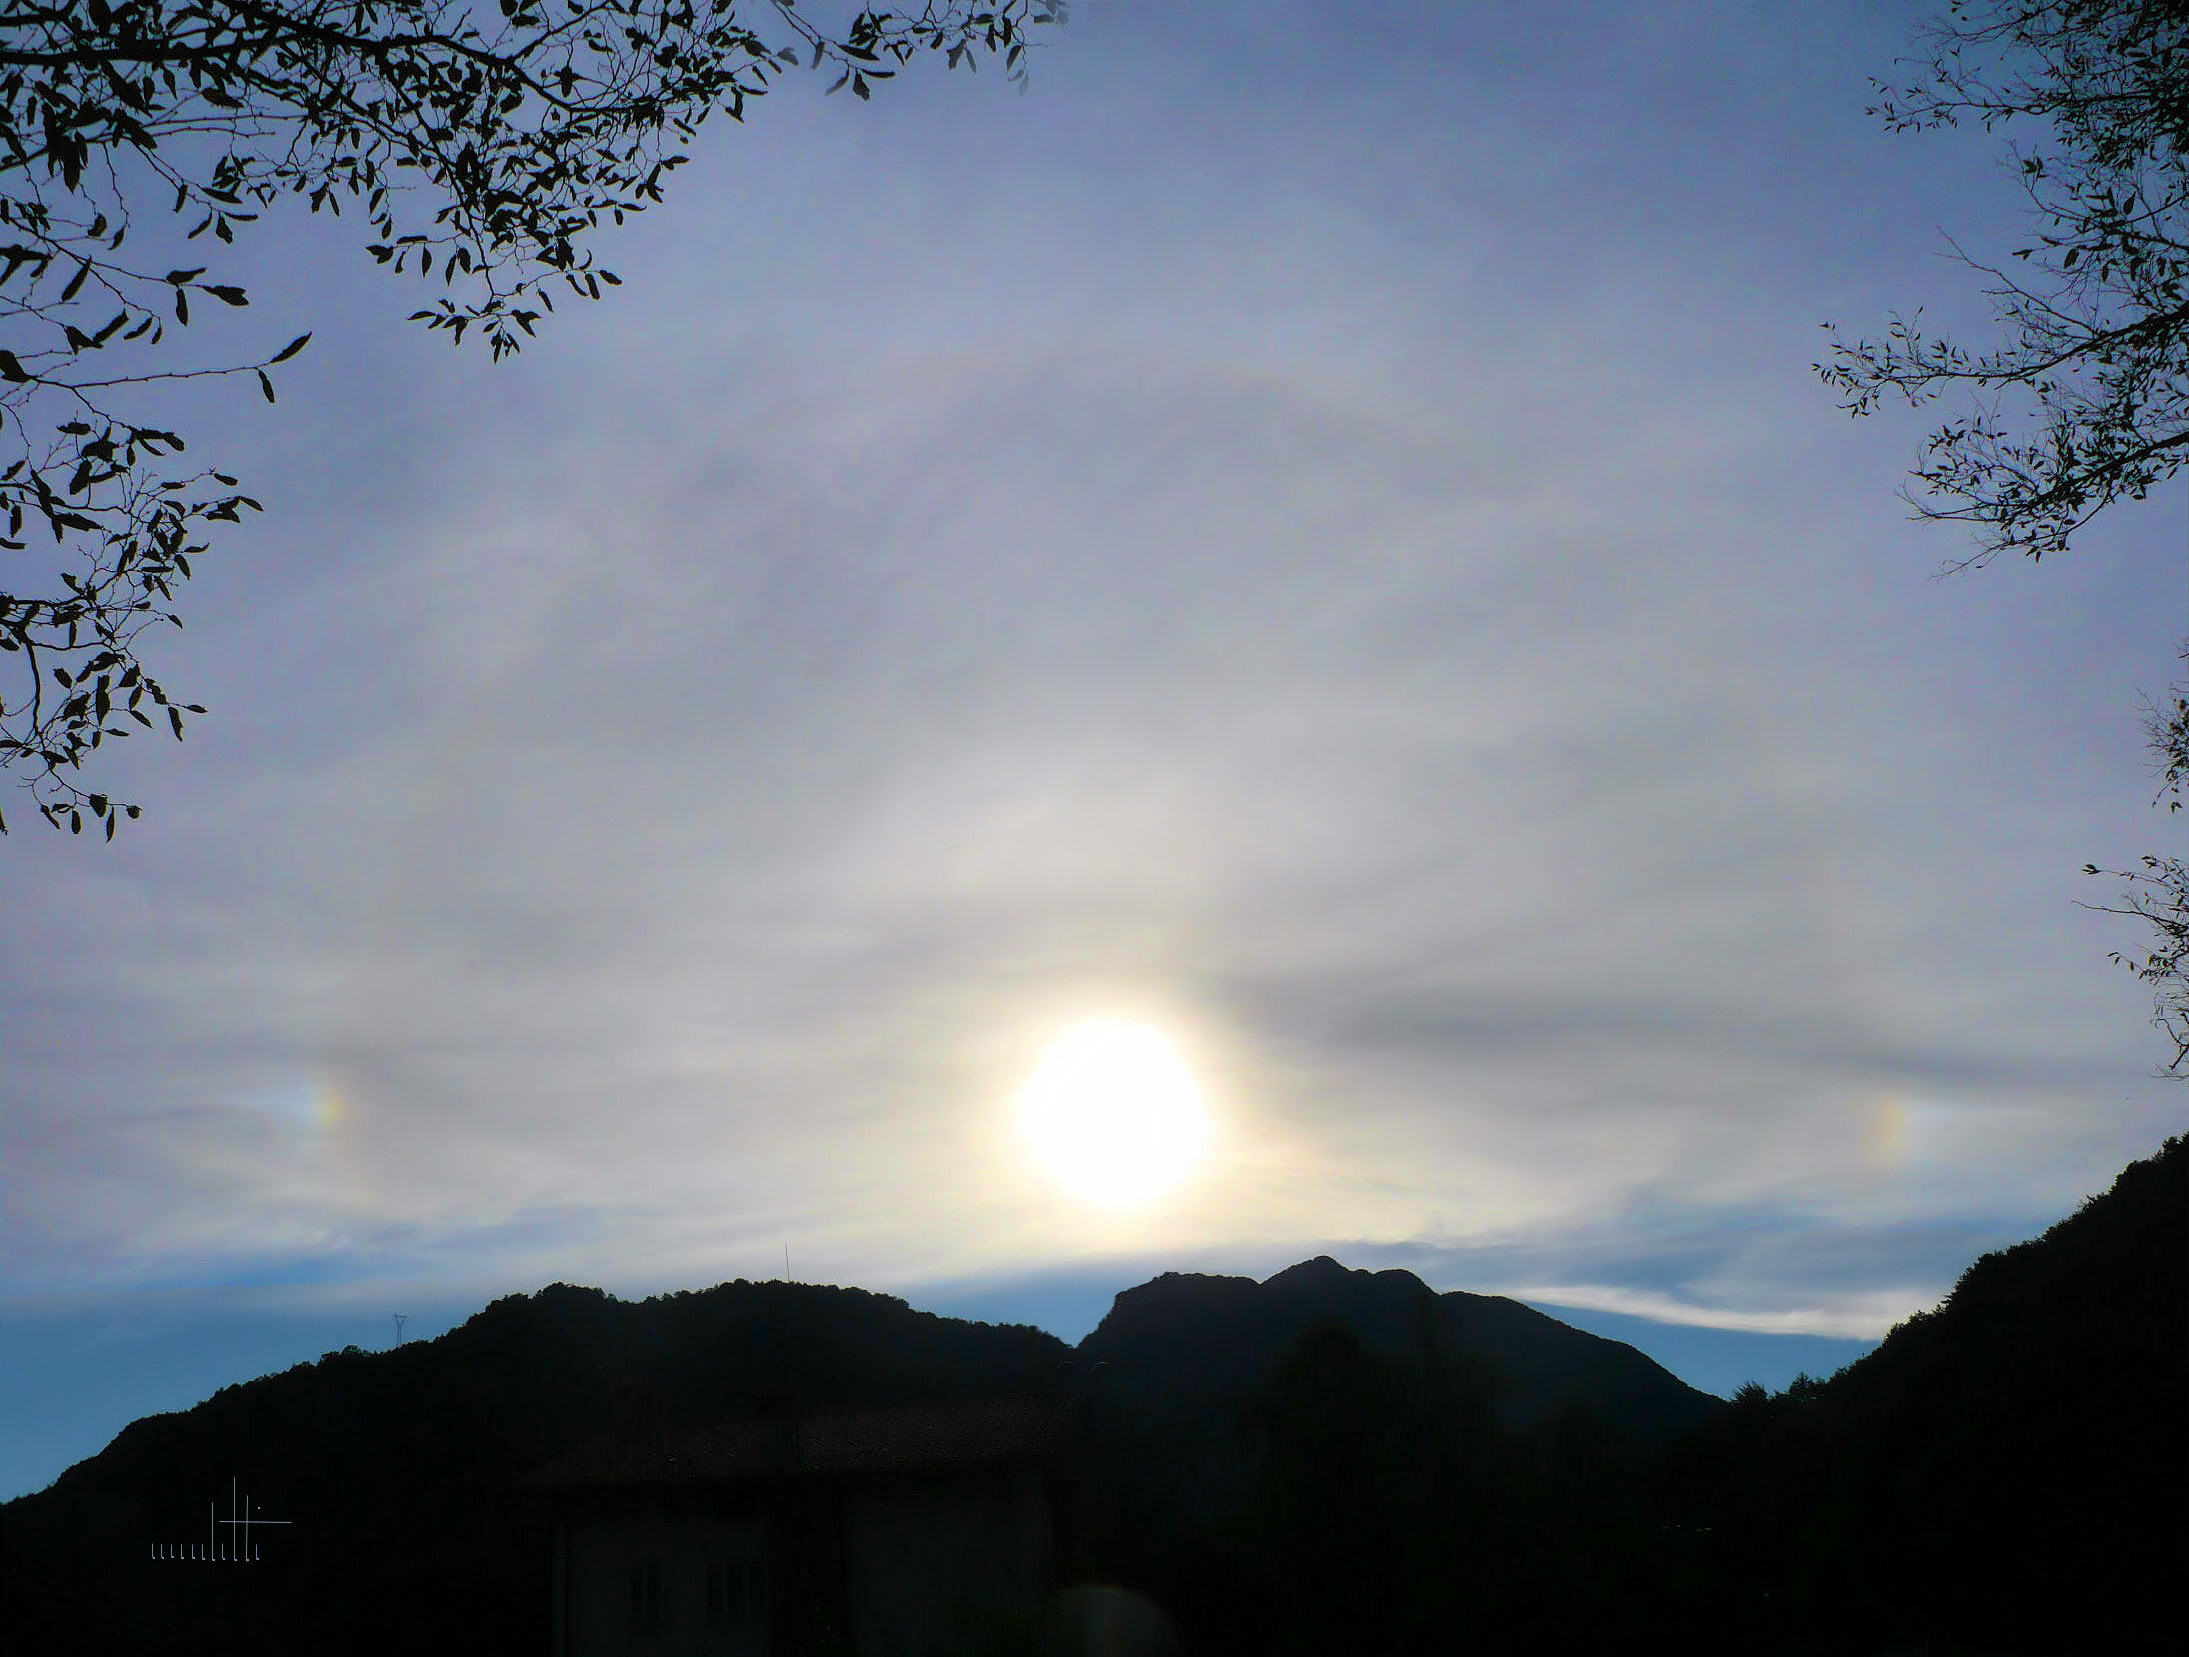 Solar Circle with sundogs: 320 KB; click on the image to enlarge at 2189x1657 pixels